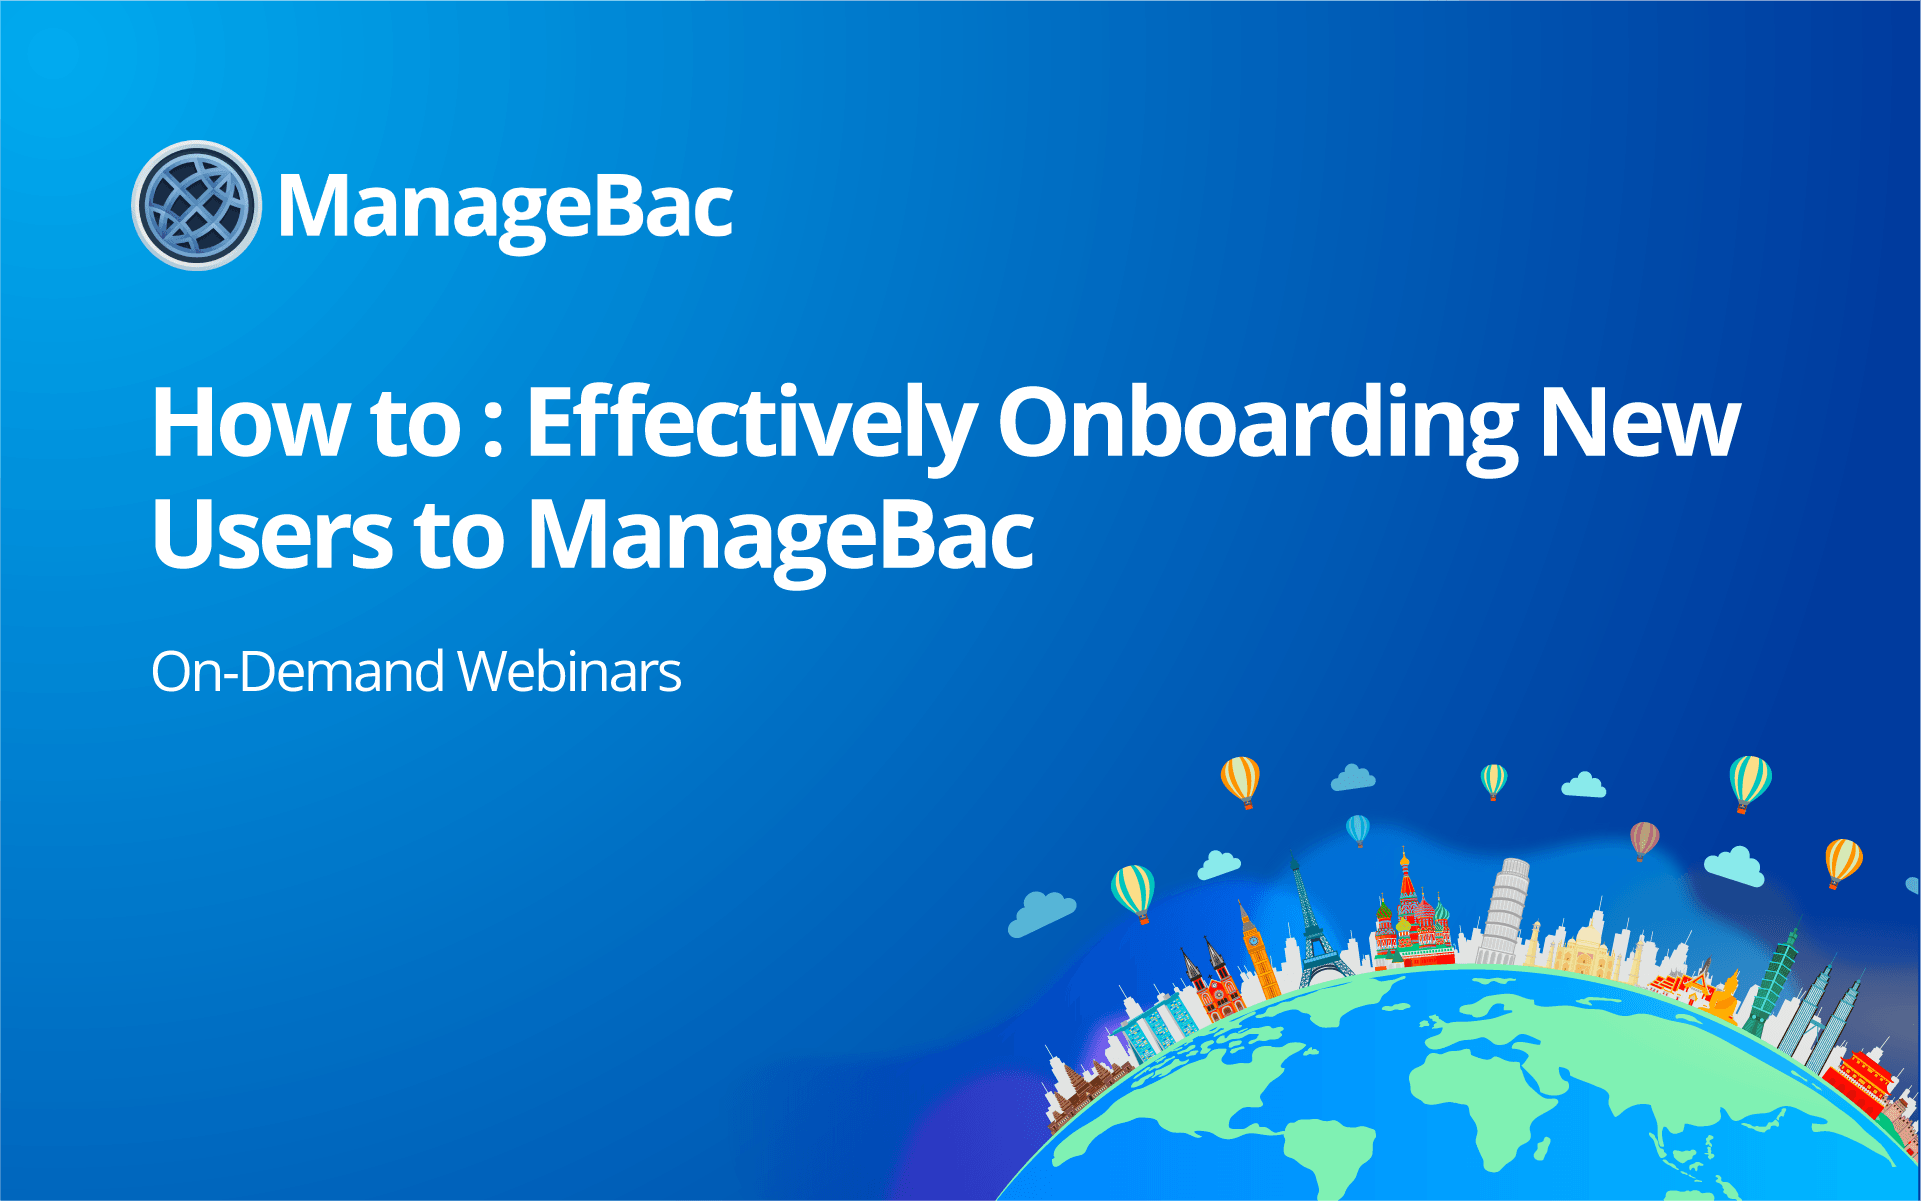 How-To: Effectively Onboarding New Users to ManageBac